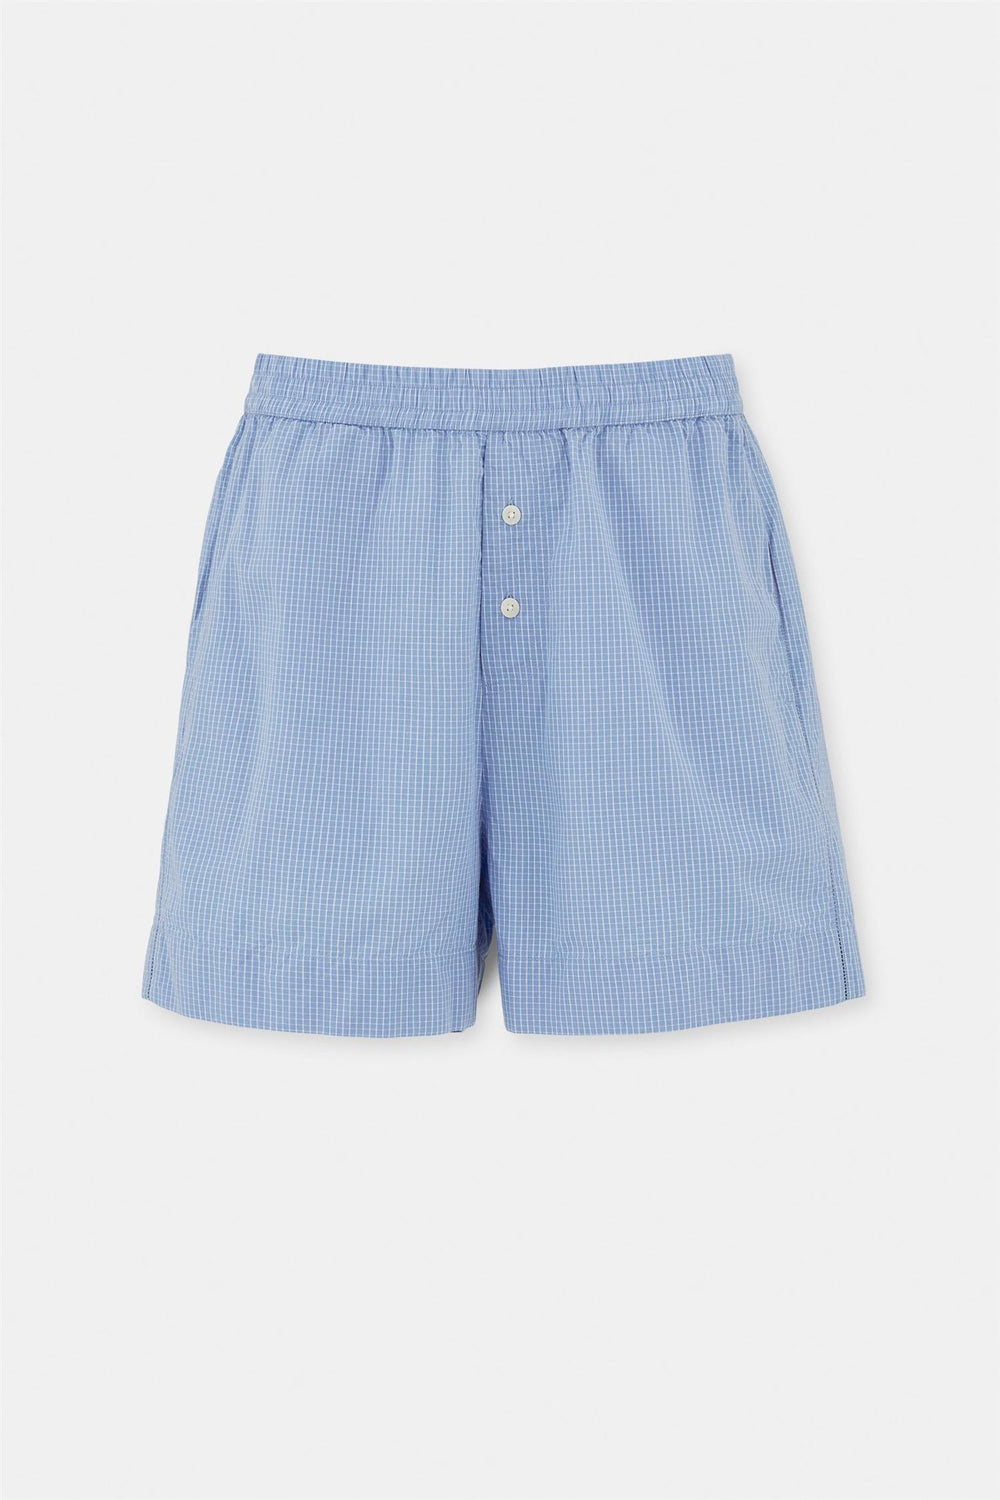 AIAYU - CASUAL SHORTS CHECK MIX BLUE - Dale